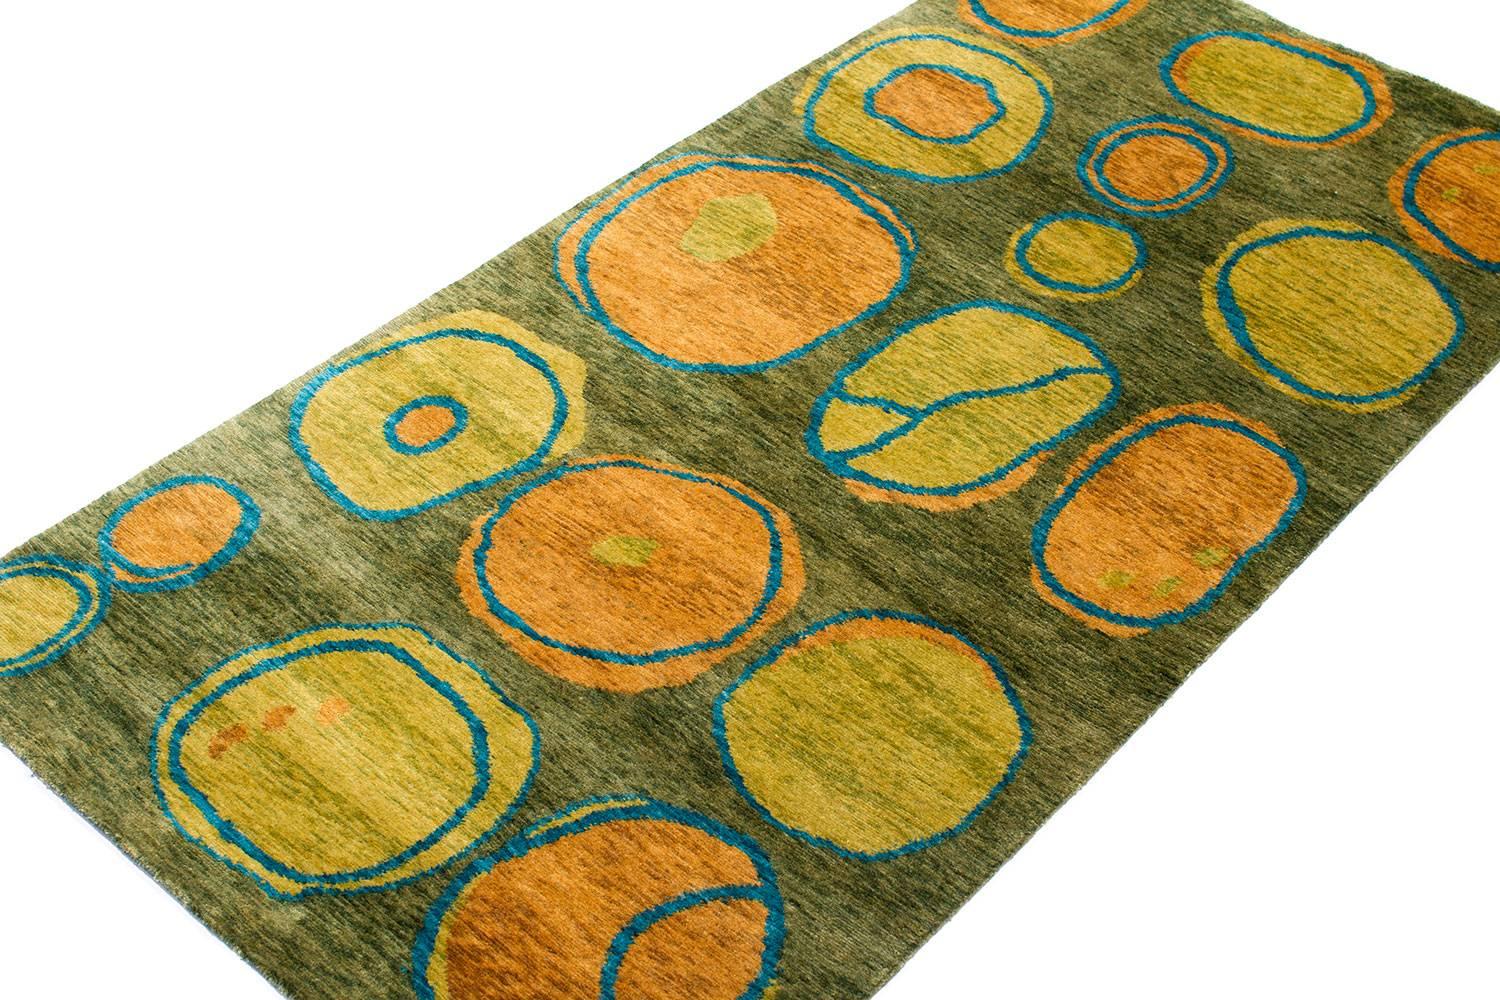 This grassy green carpet is an original design by Joseph Carini titled 'Otto'. Hand-knotted in Nepal in matka silk - matka silk is coarser than regular silk, it vaguely resembles linen, it is a simple and elegant material which is often used for